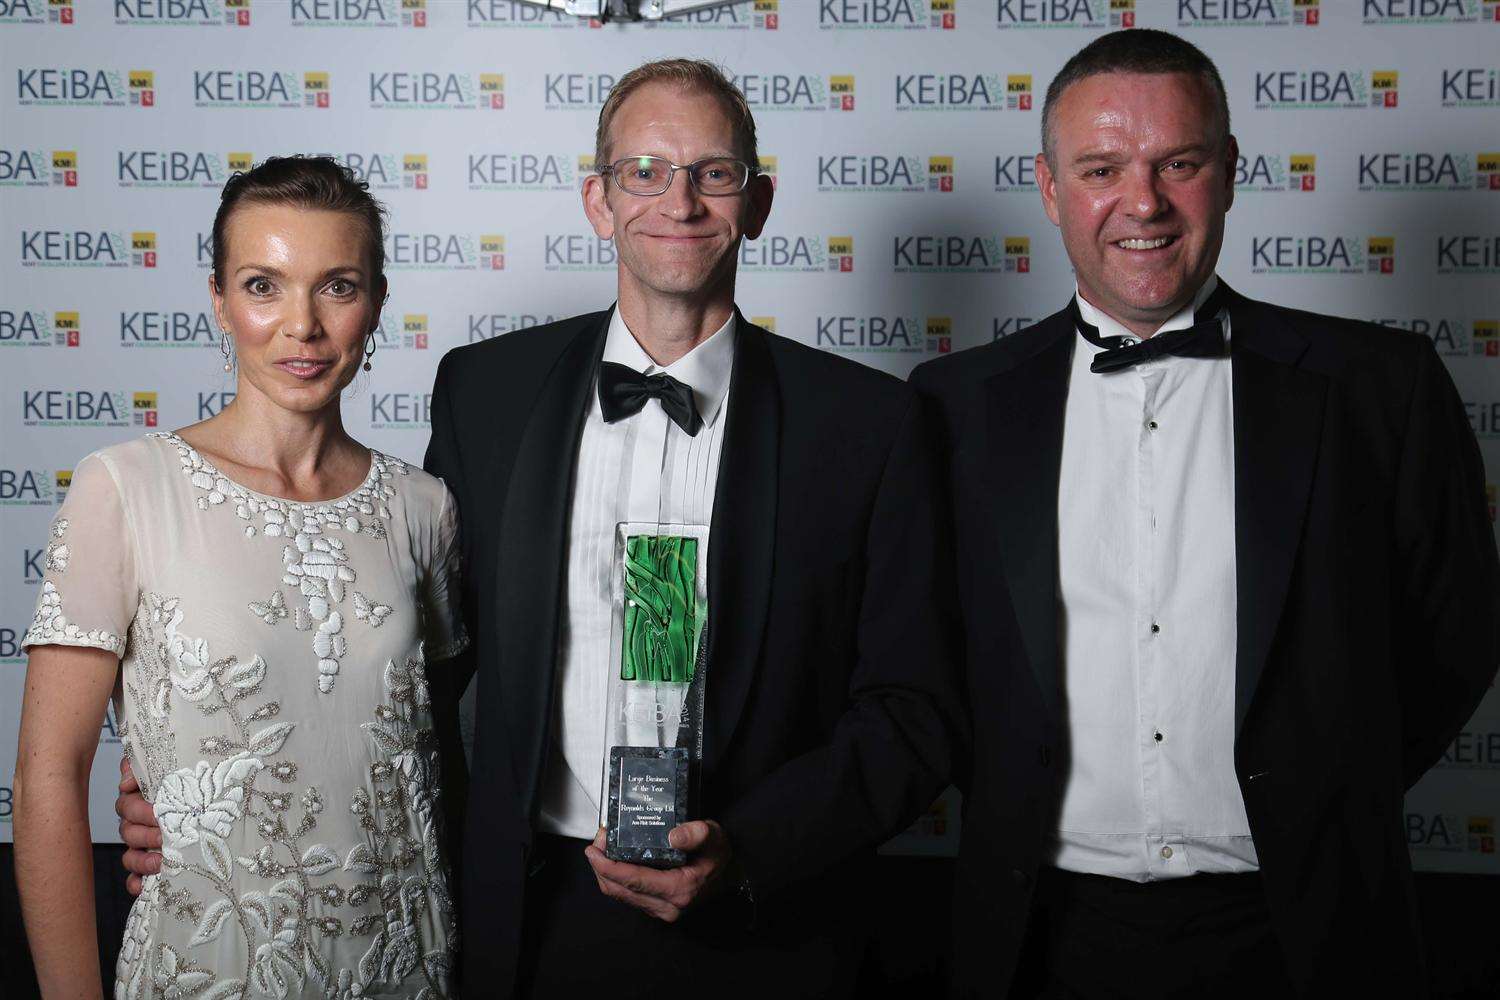 Reynolds Group Emma Reynolds and Jason Hall pick up the Large Business of the Year award at the KEiBAs with sponsor Jon Cooper of Aon Risk Solutions, right